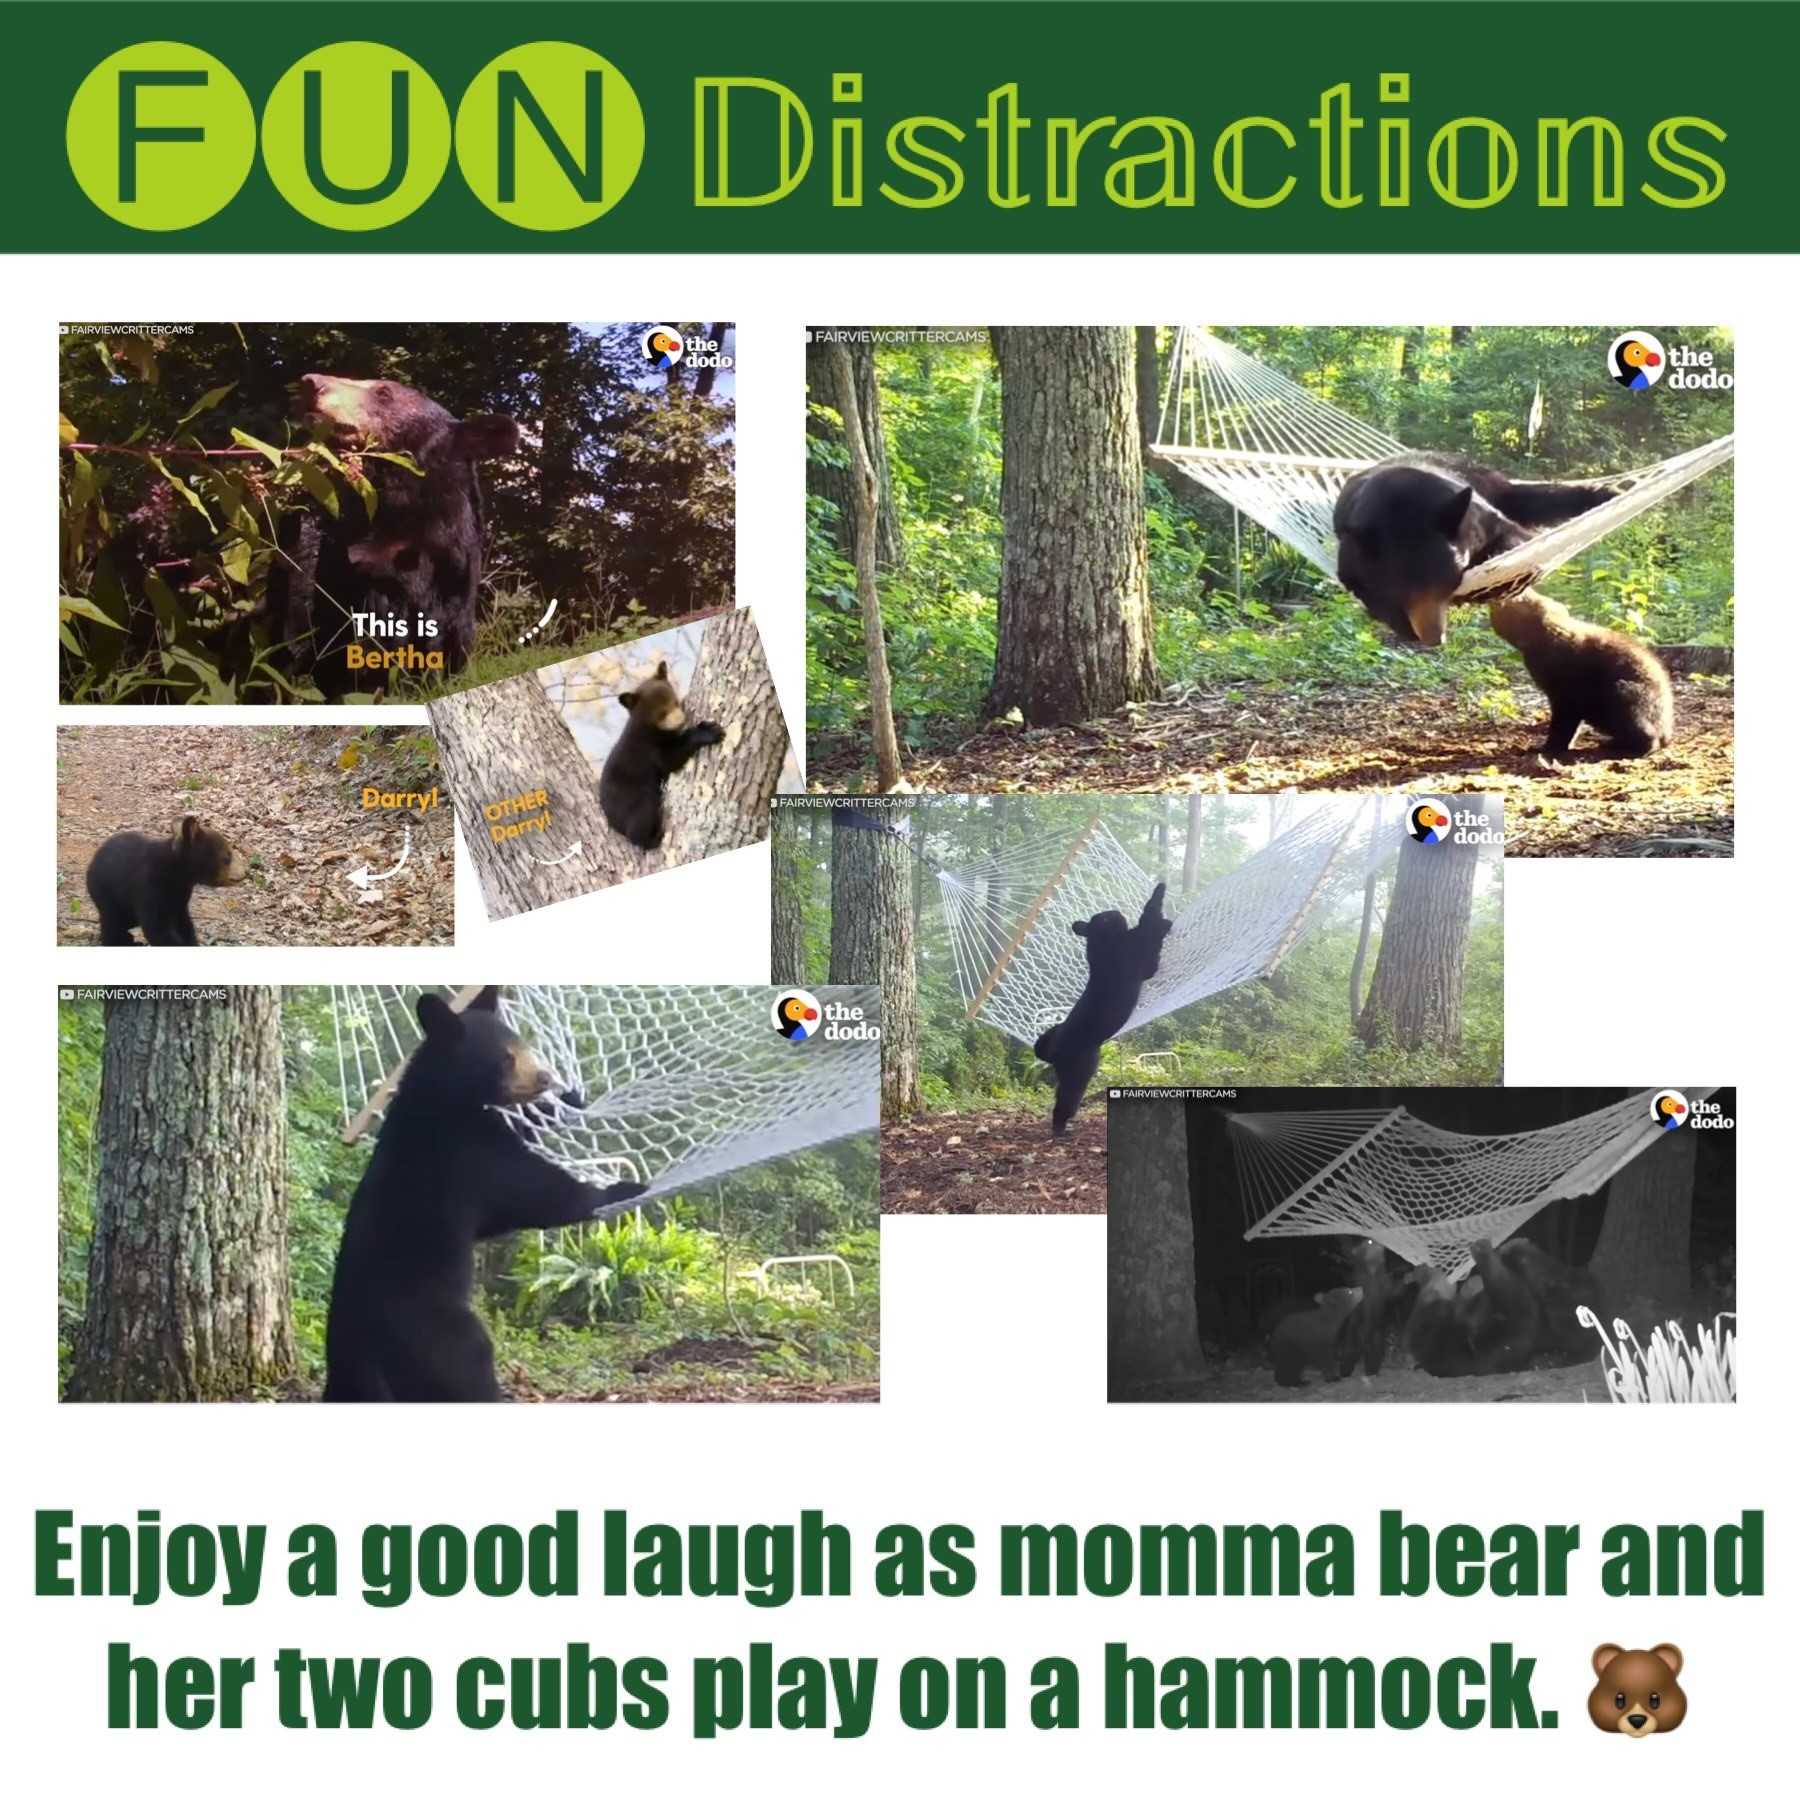 Image advertising the Library’s FUN Distractions series post about a bear family enjoying a hammock